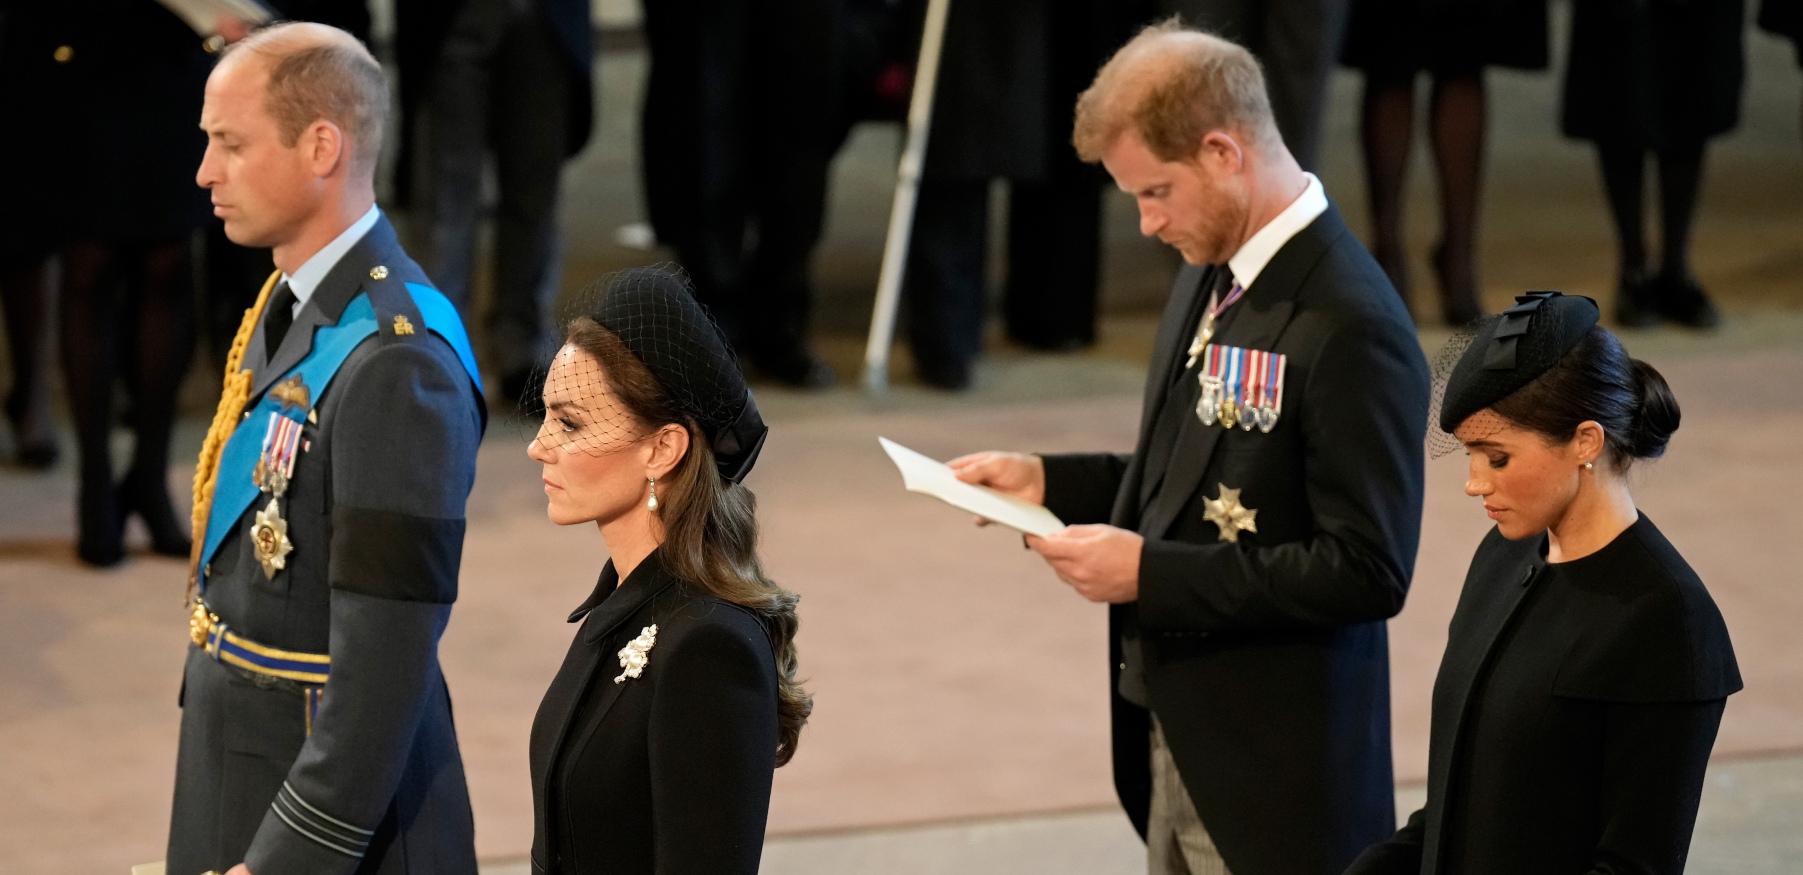 Prince William, Prince of Wales, Catherine, Princess of Wales, Prince Harry, Duke of Sussex and Meghan, Duchess of Sussex